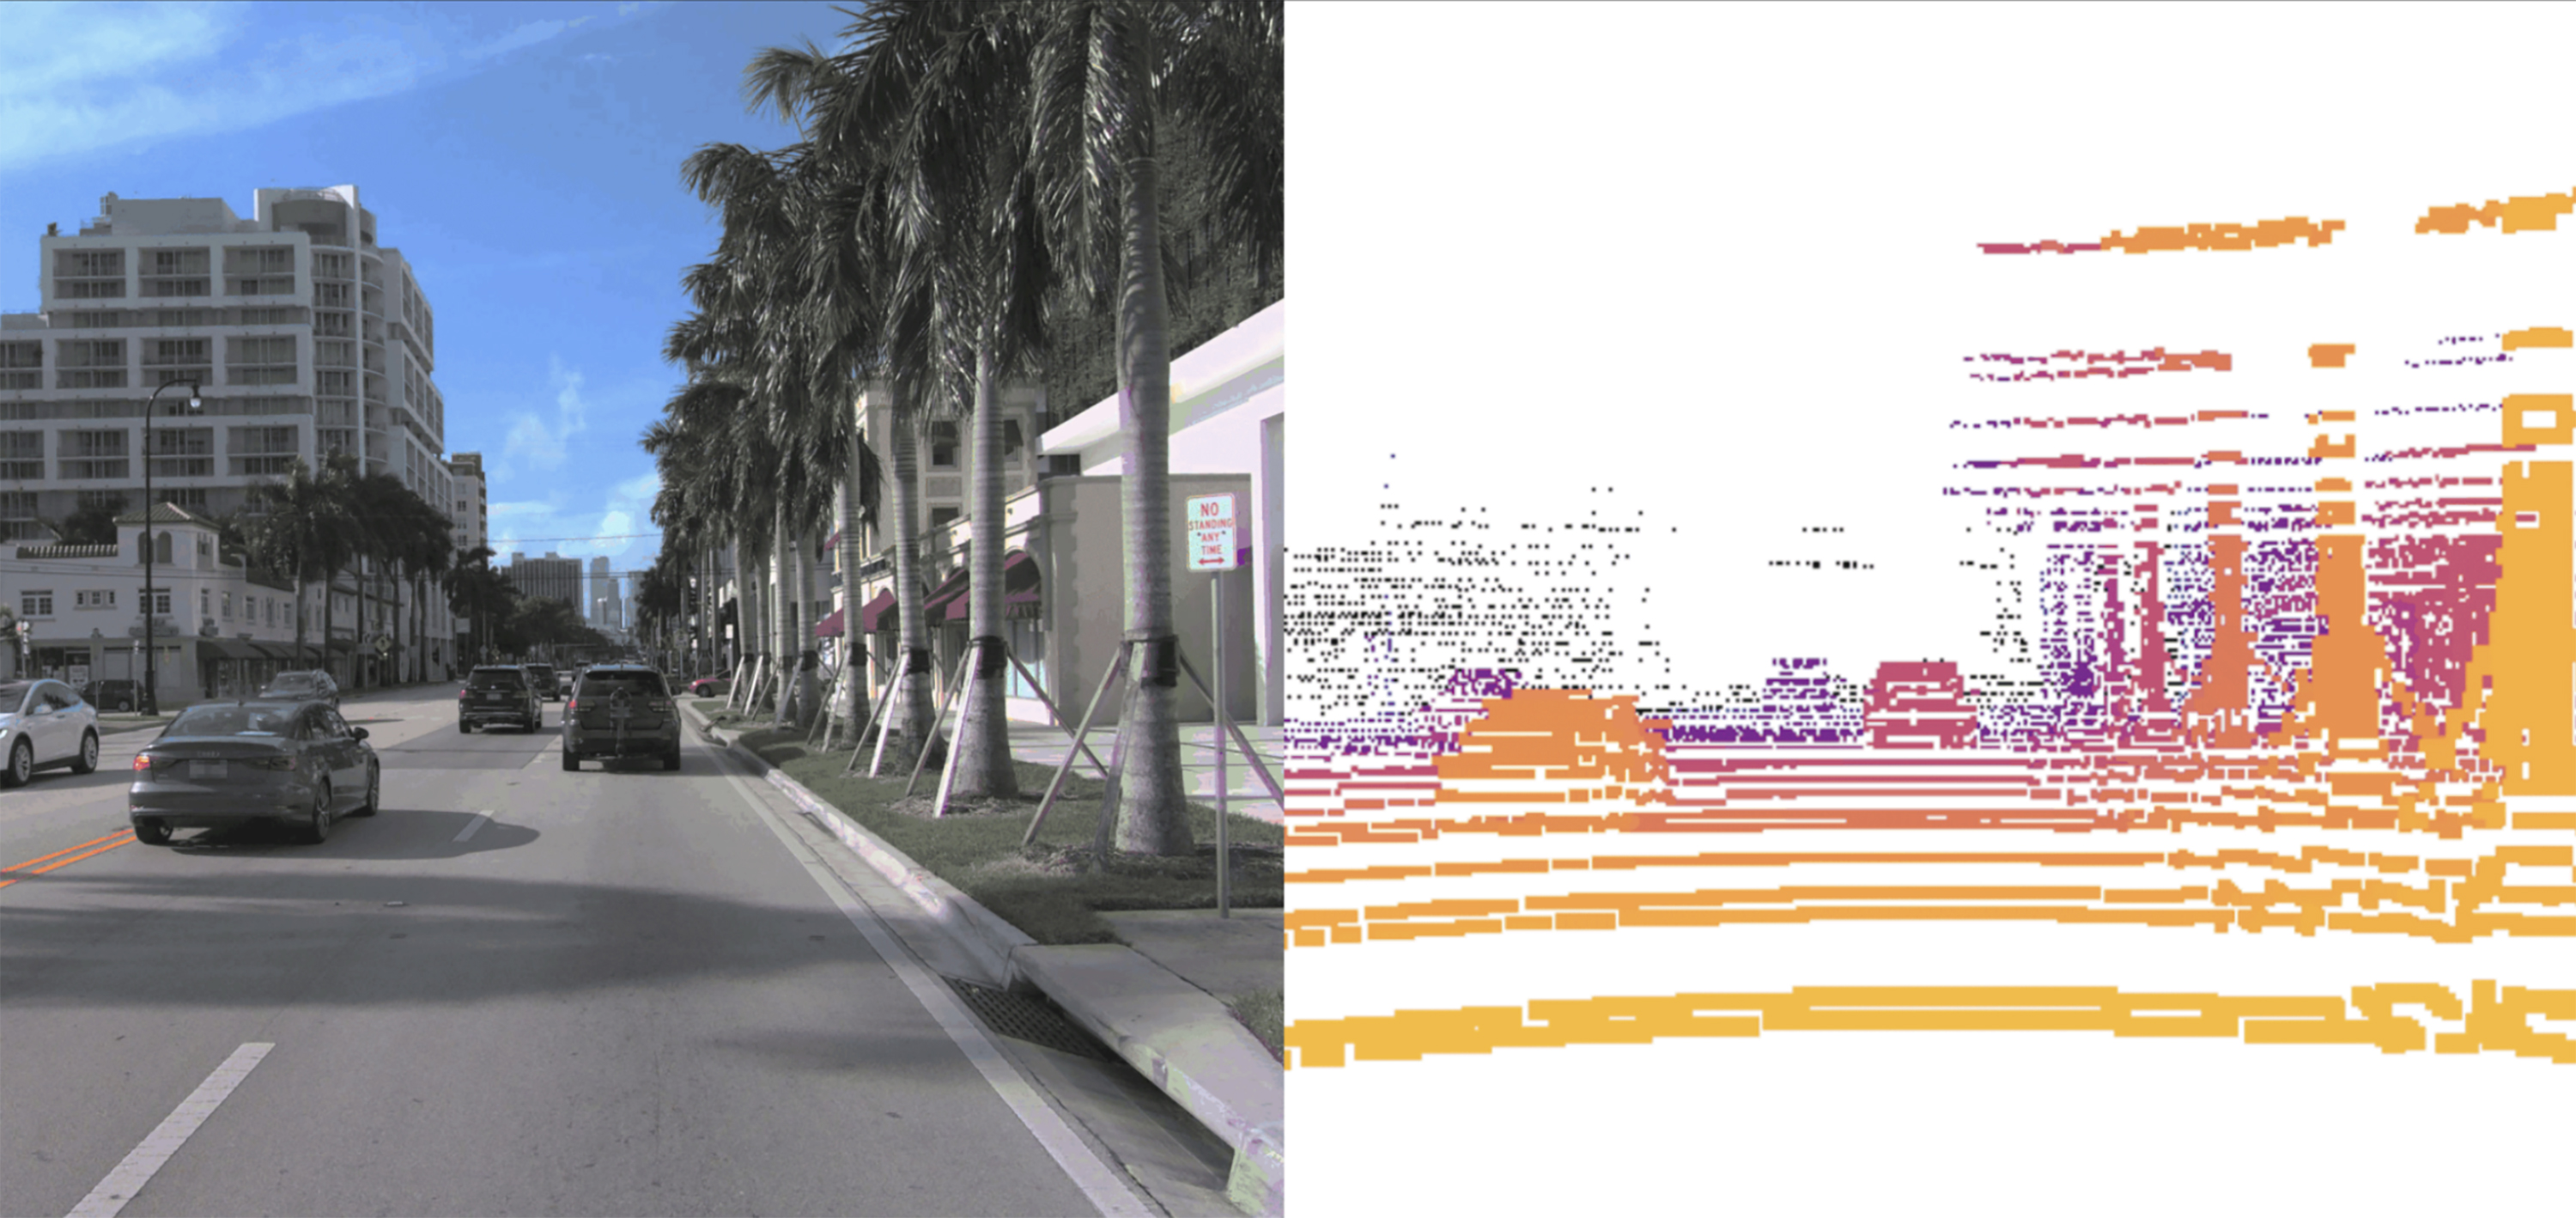 A diptych view of the same image via camera and LiDAR.